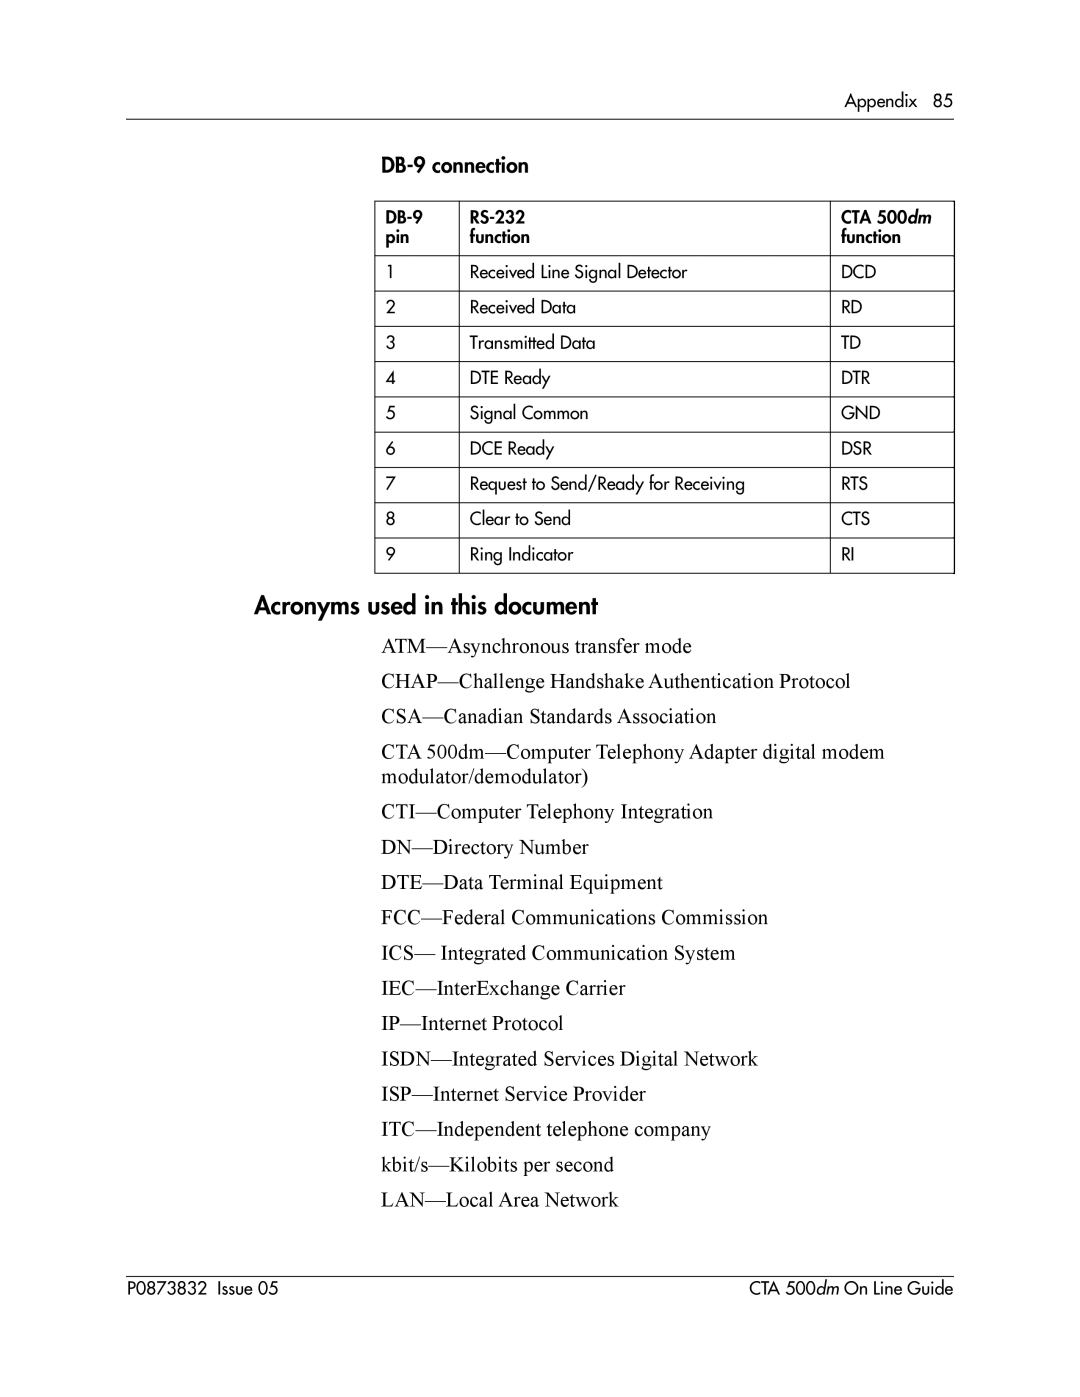 Nortel Networks CTA 500dm manual Acronyms used in this document 